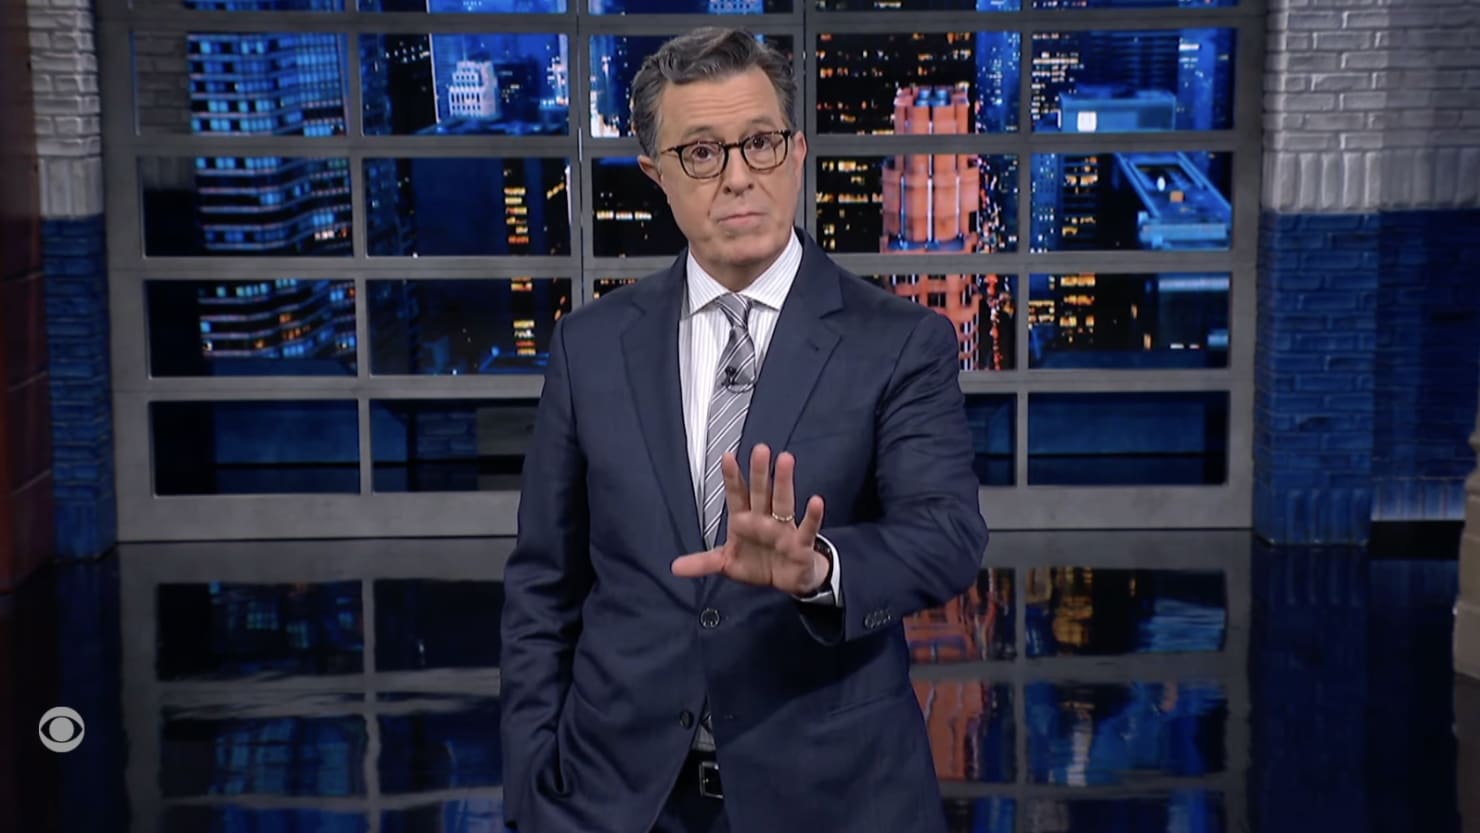 Stephen Colbert fiercely defends campus protesters against Trump attack